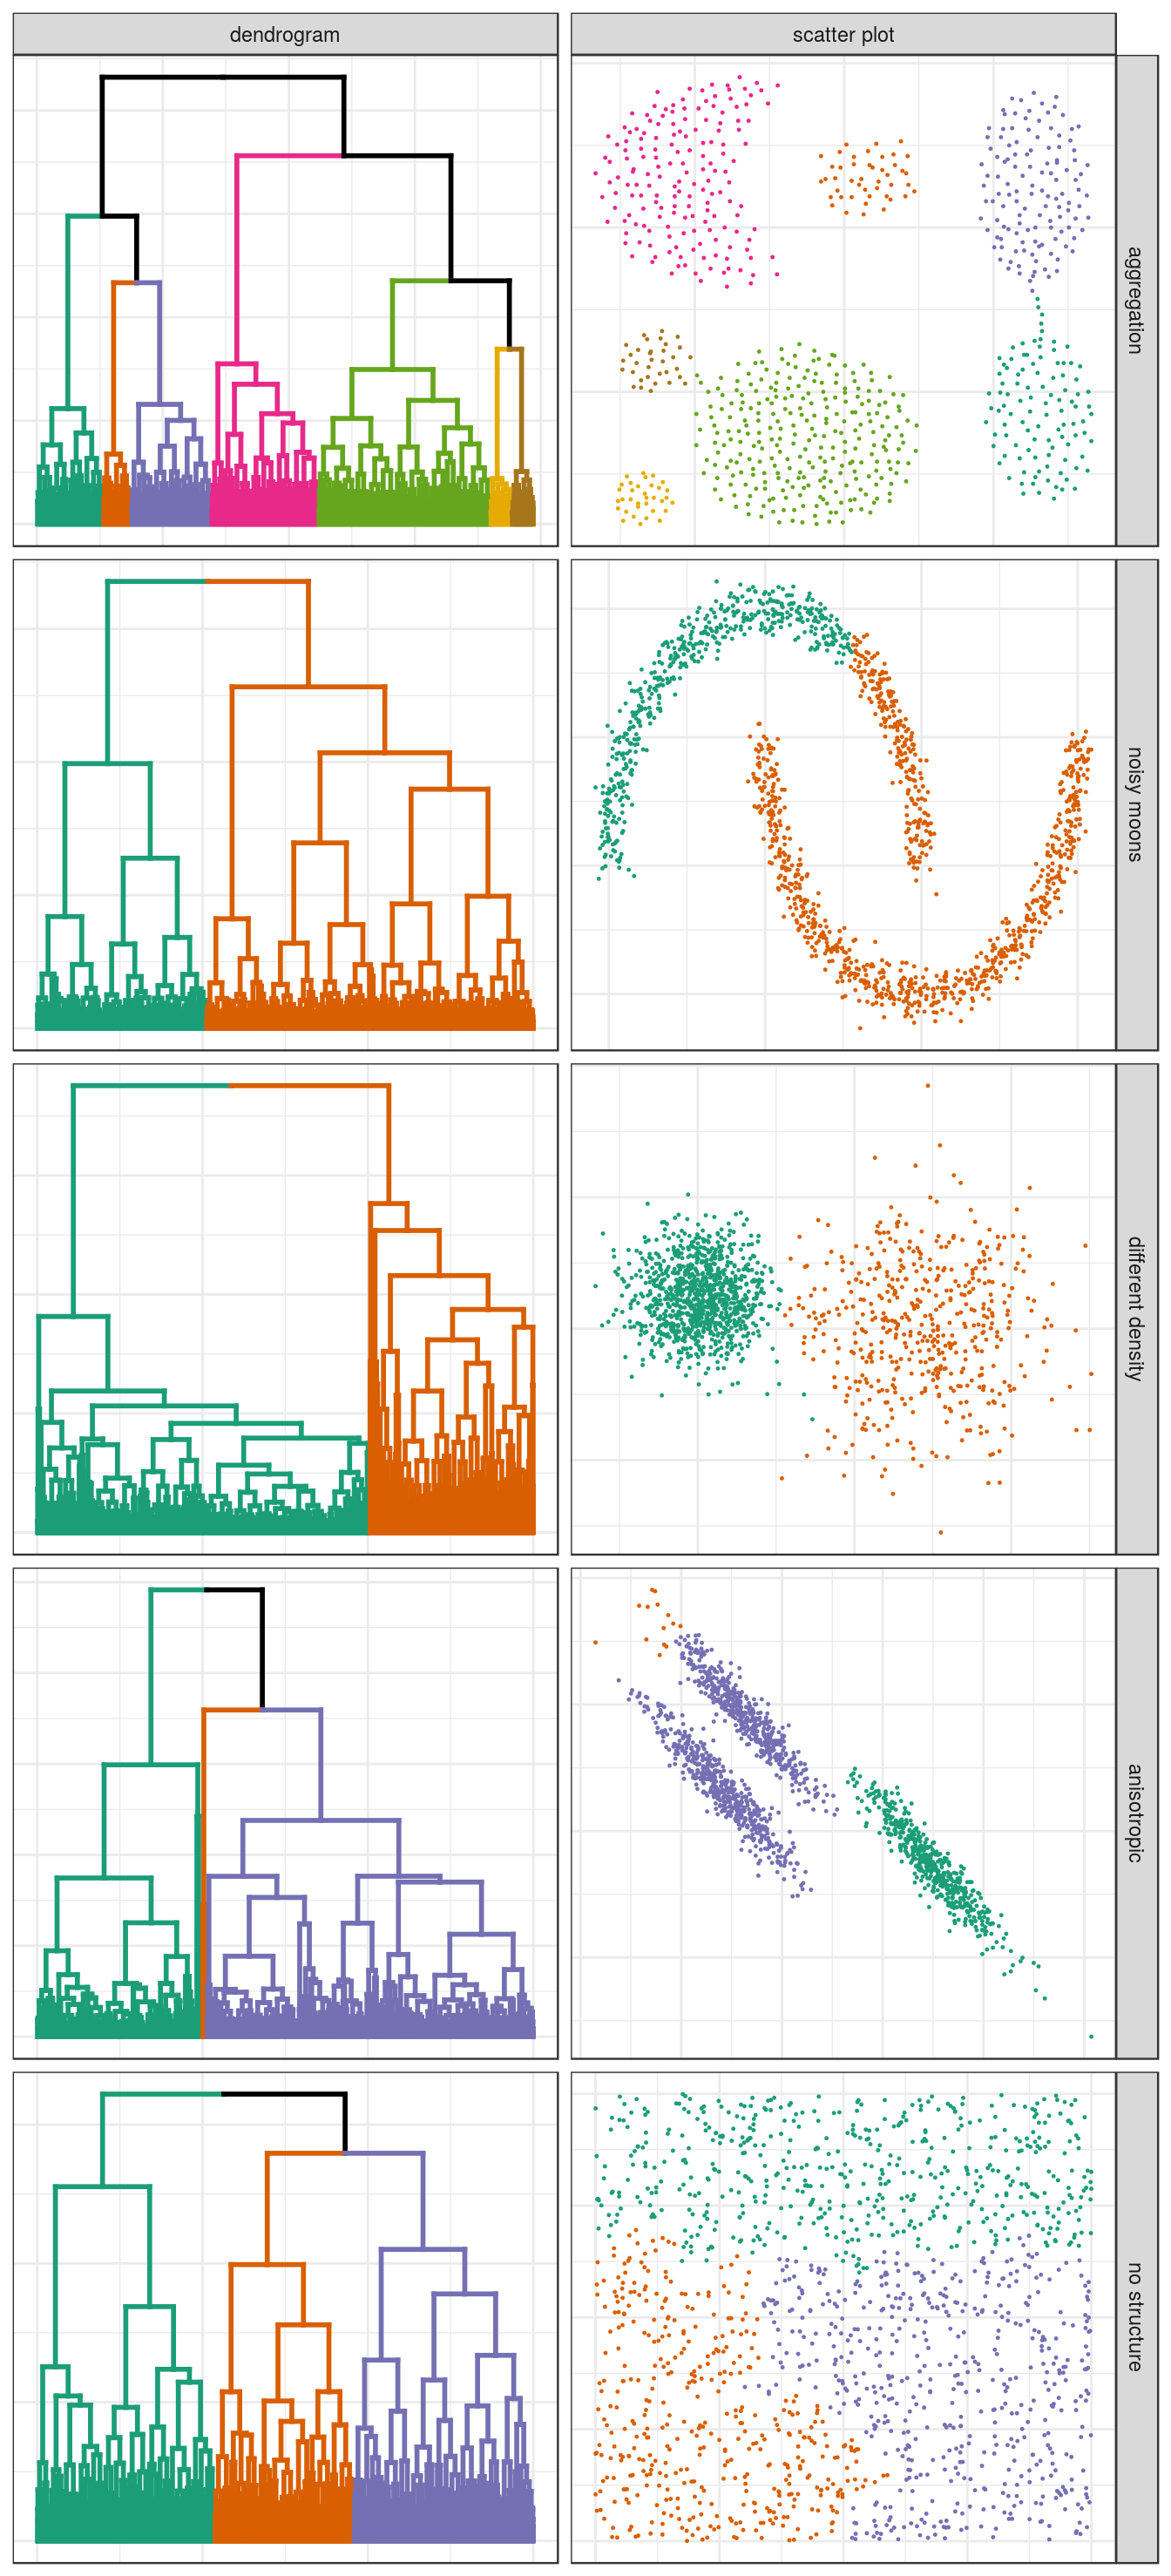 Hierarchical clustering of synthetic data-sets. 